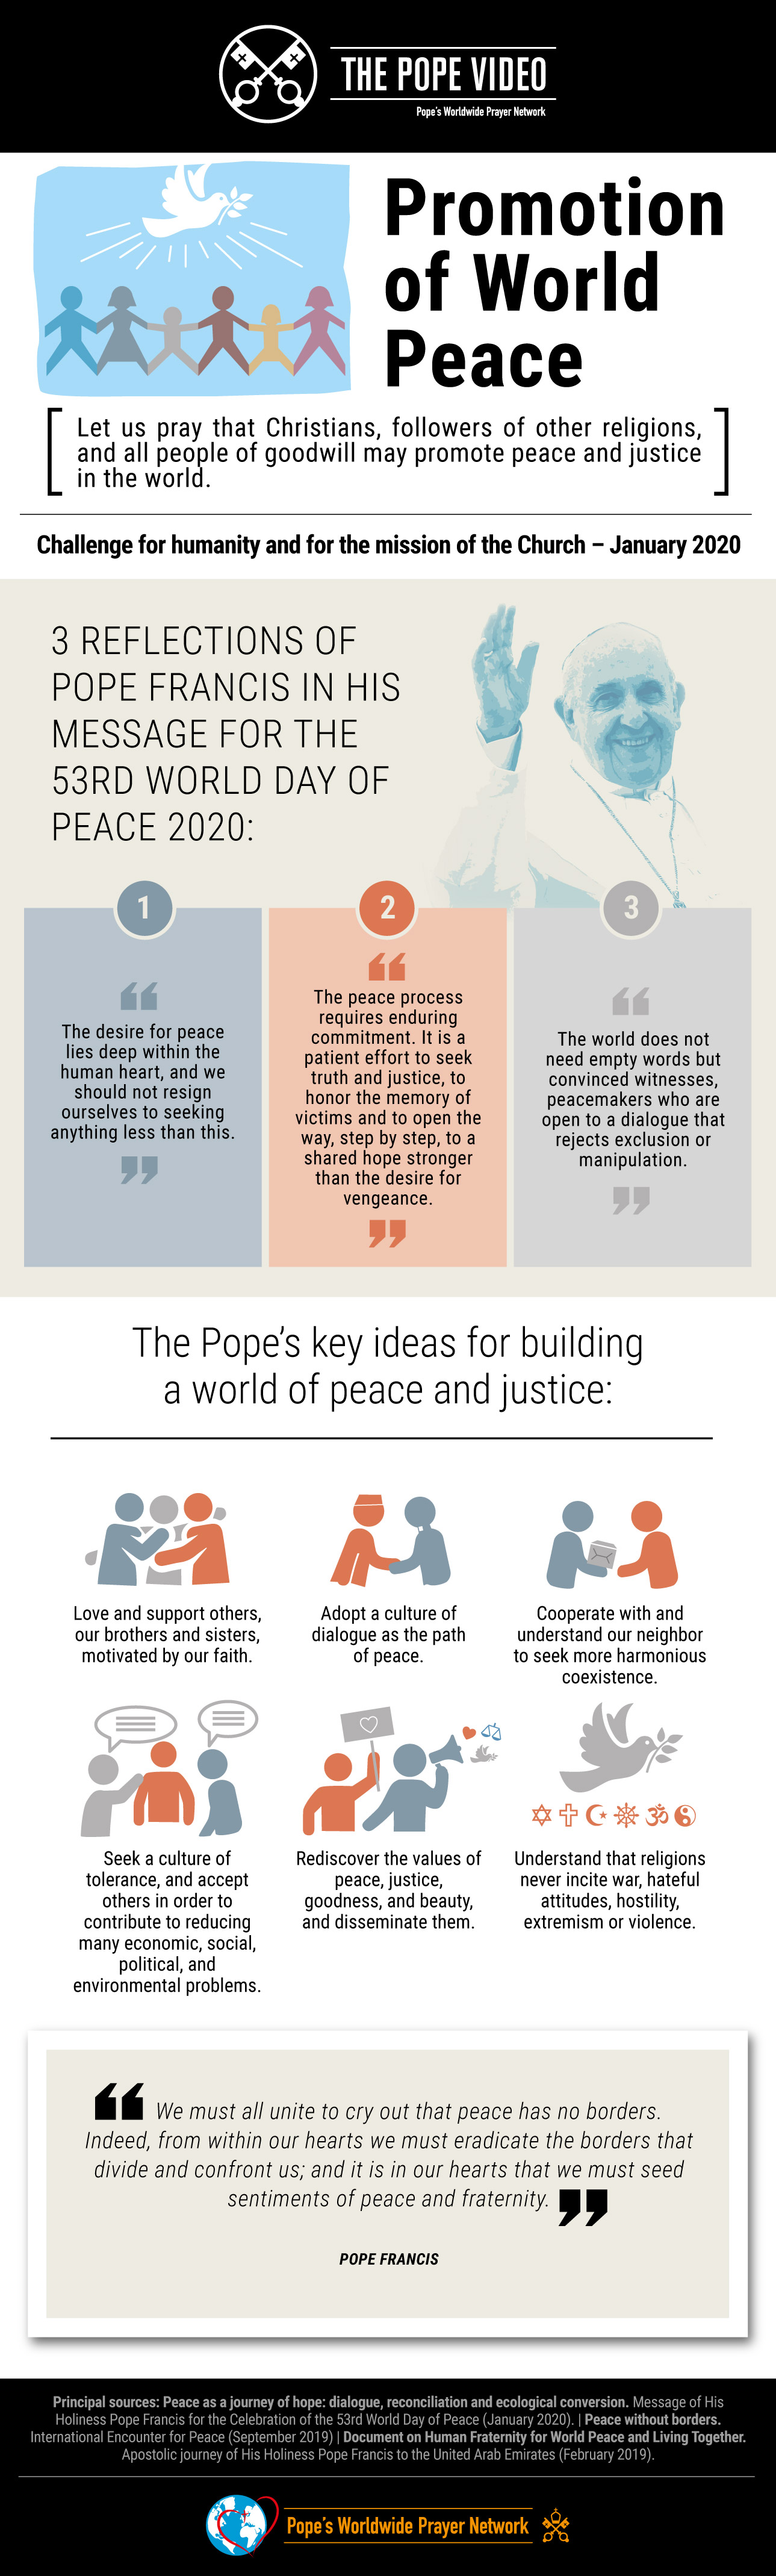 infographic-tpv-1-2020-en-the-pope-video-promotion-of-world-peace.jpg